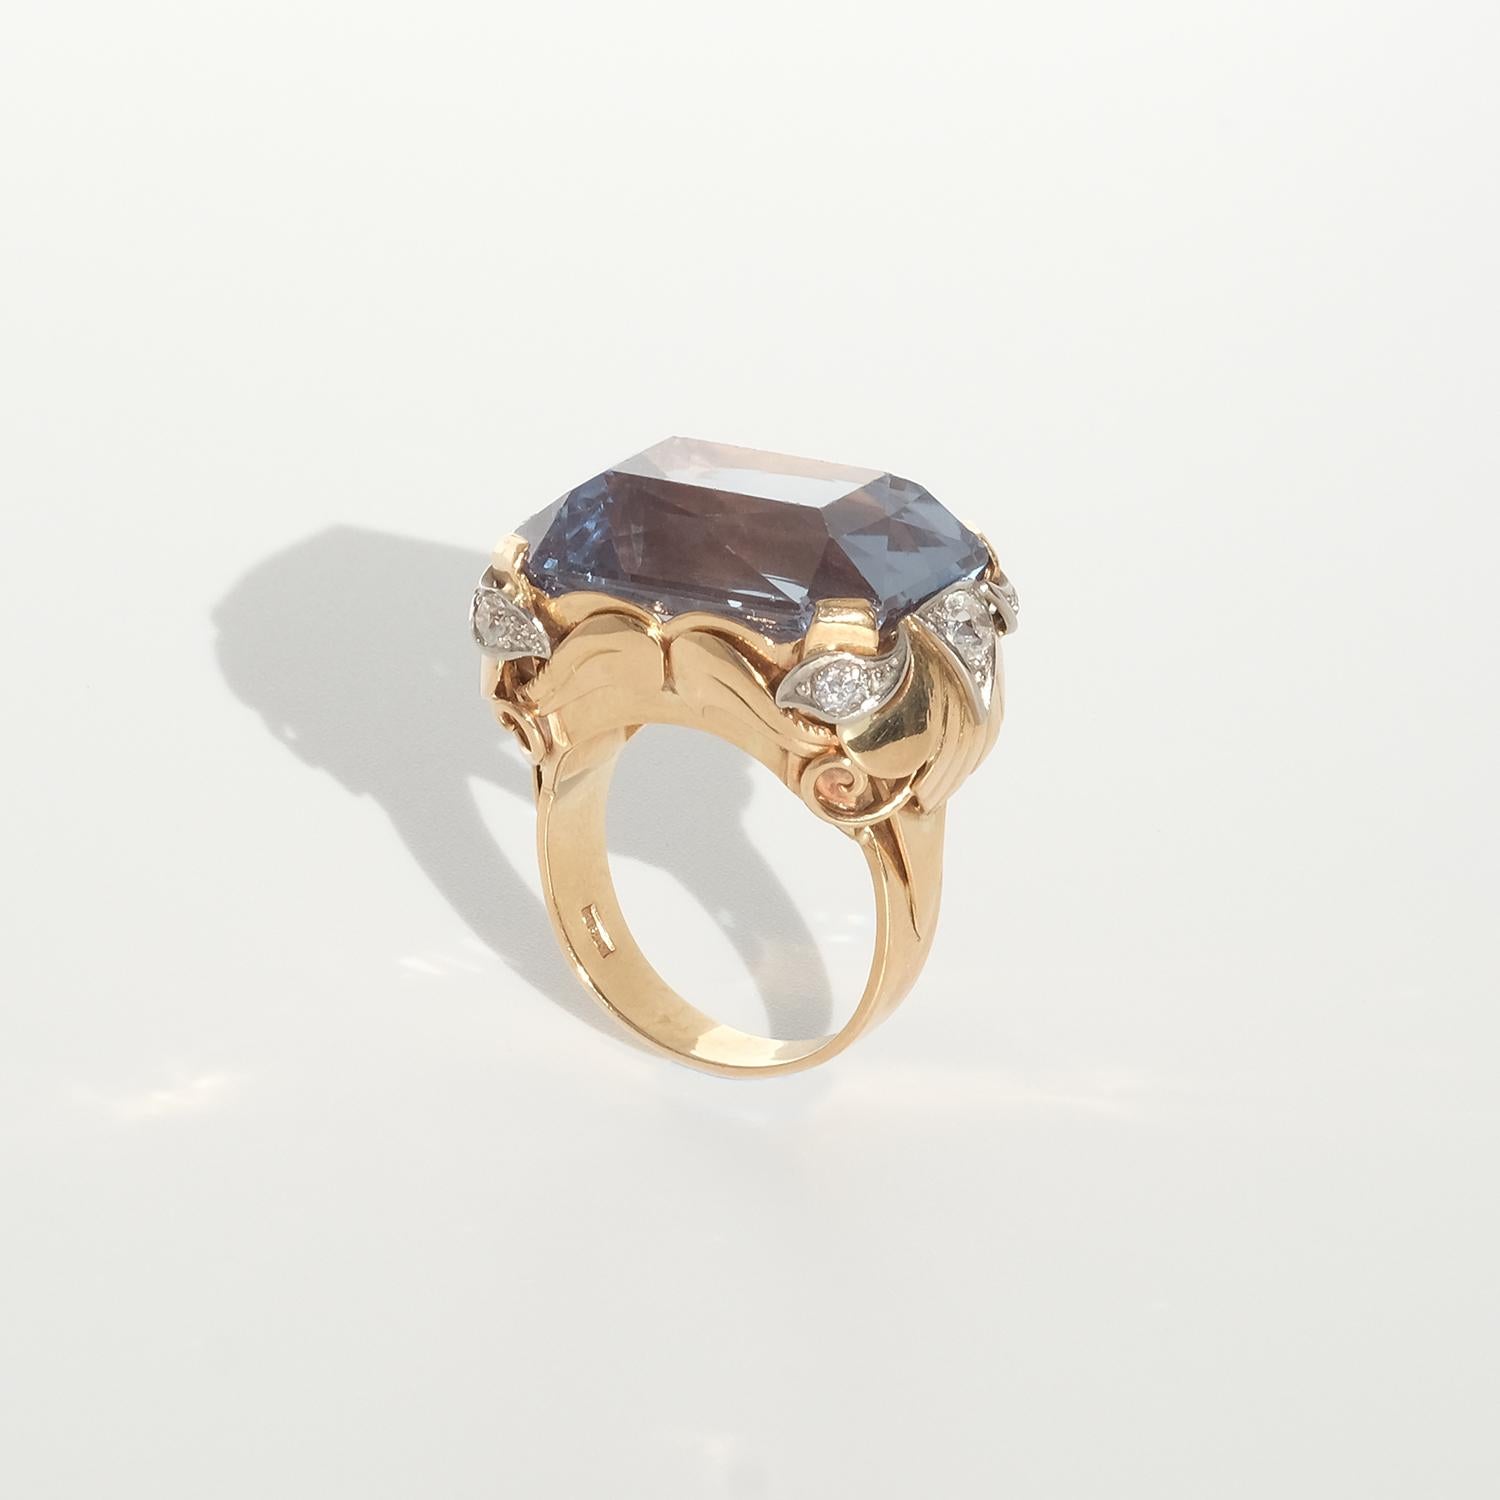 Women's or Men's 18 karat gold ring with a large synthetic spinel and diamonds.